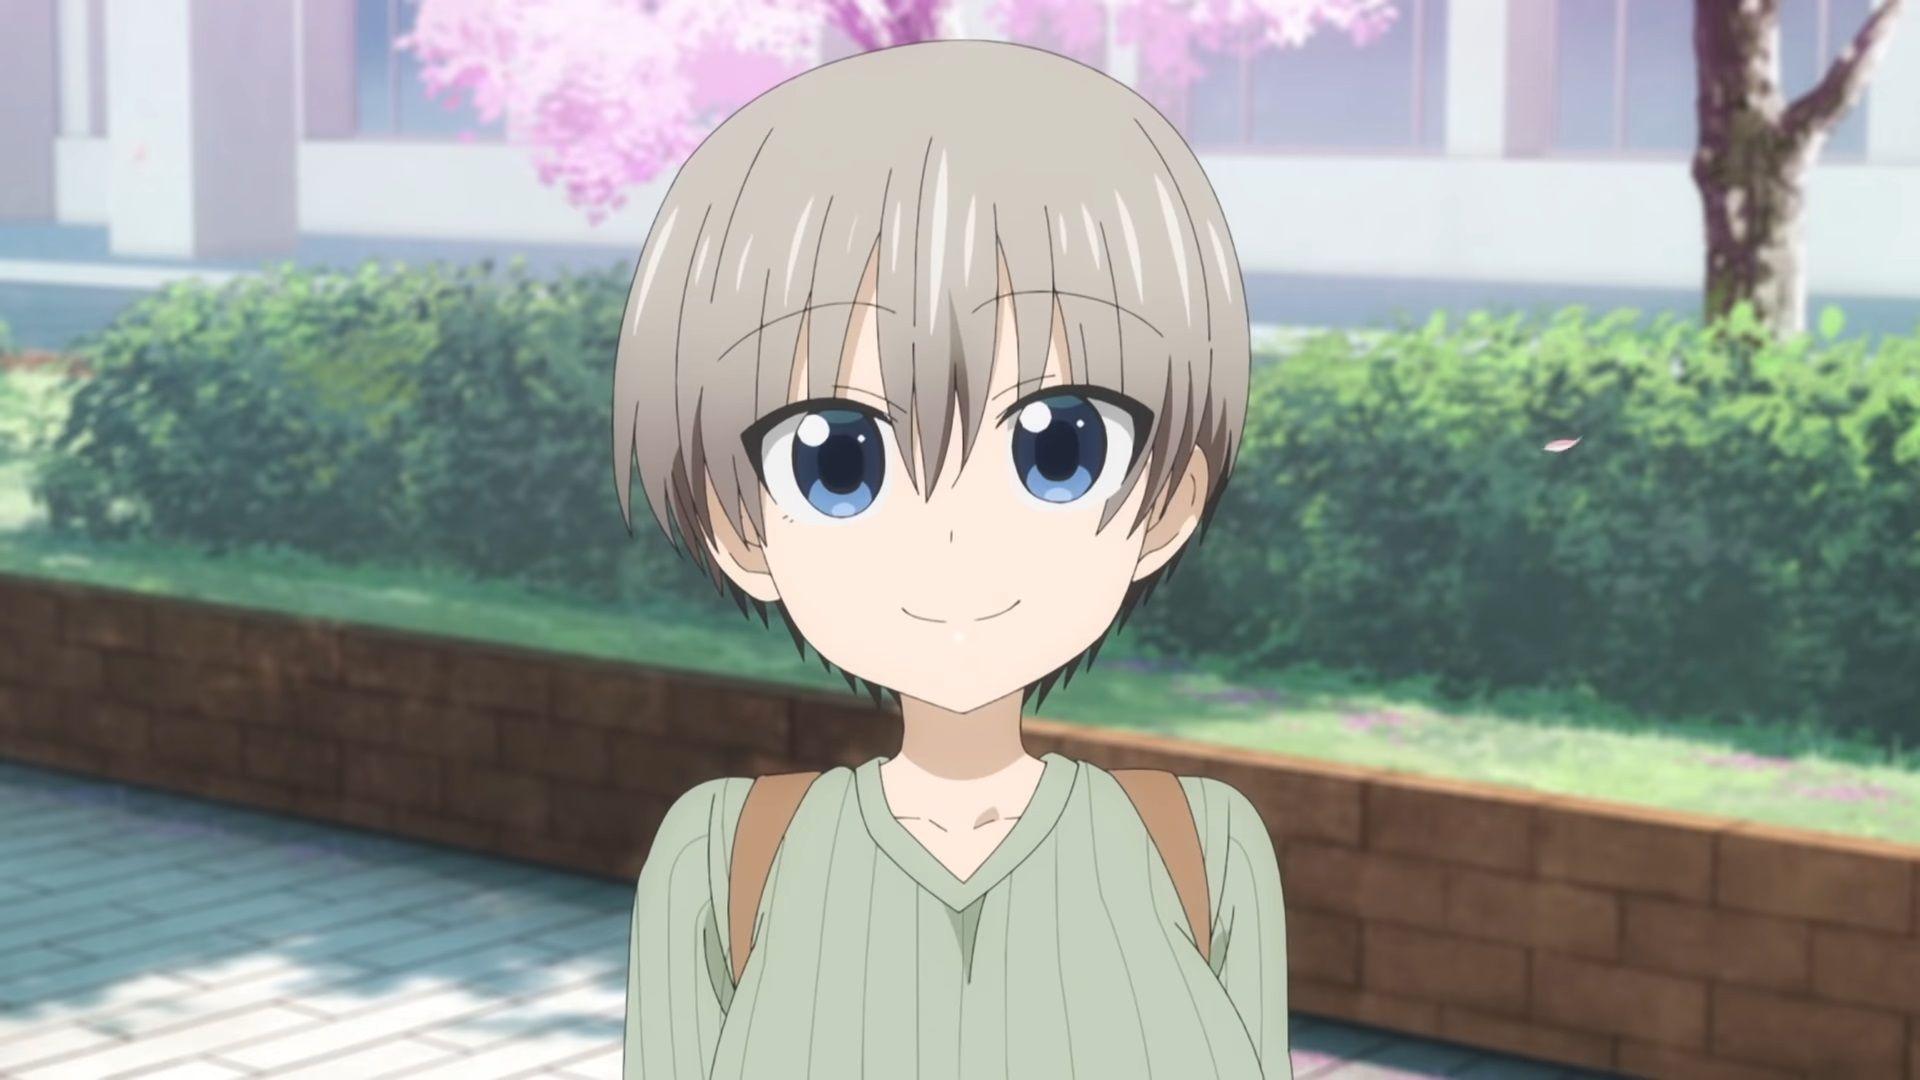 Download Uzaki Chan Wallpaper Free for Android  Uzaki Chan Wallpaper APK  Download  STEPrimocom